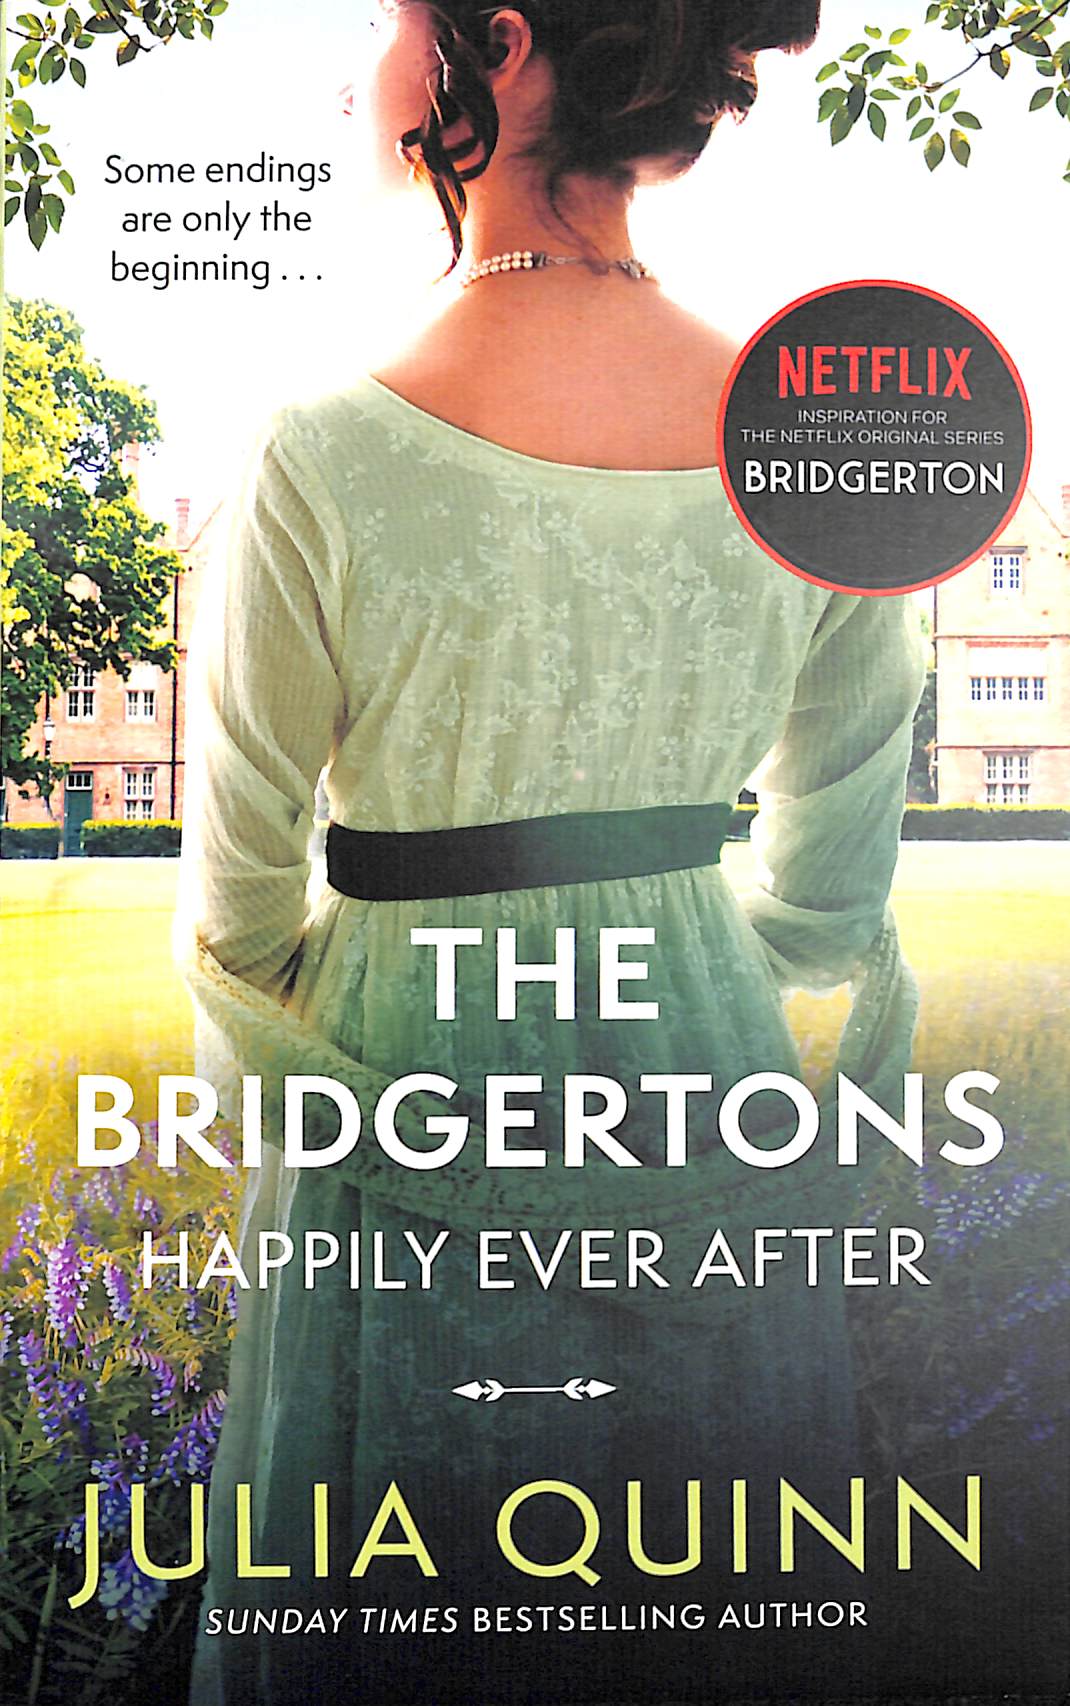 BRIDGERTONS: HAPPILY EVER AFTER